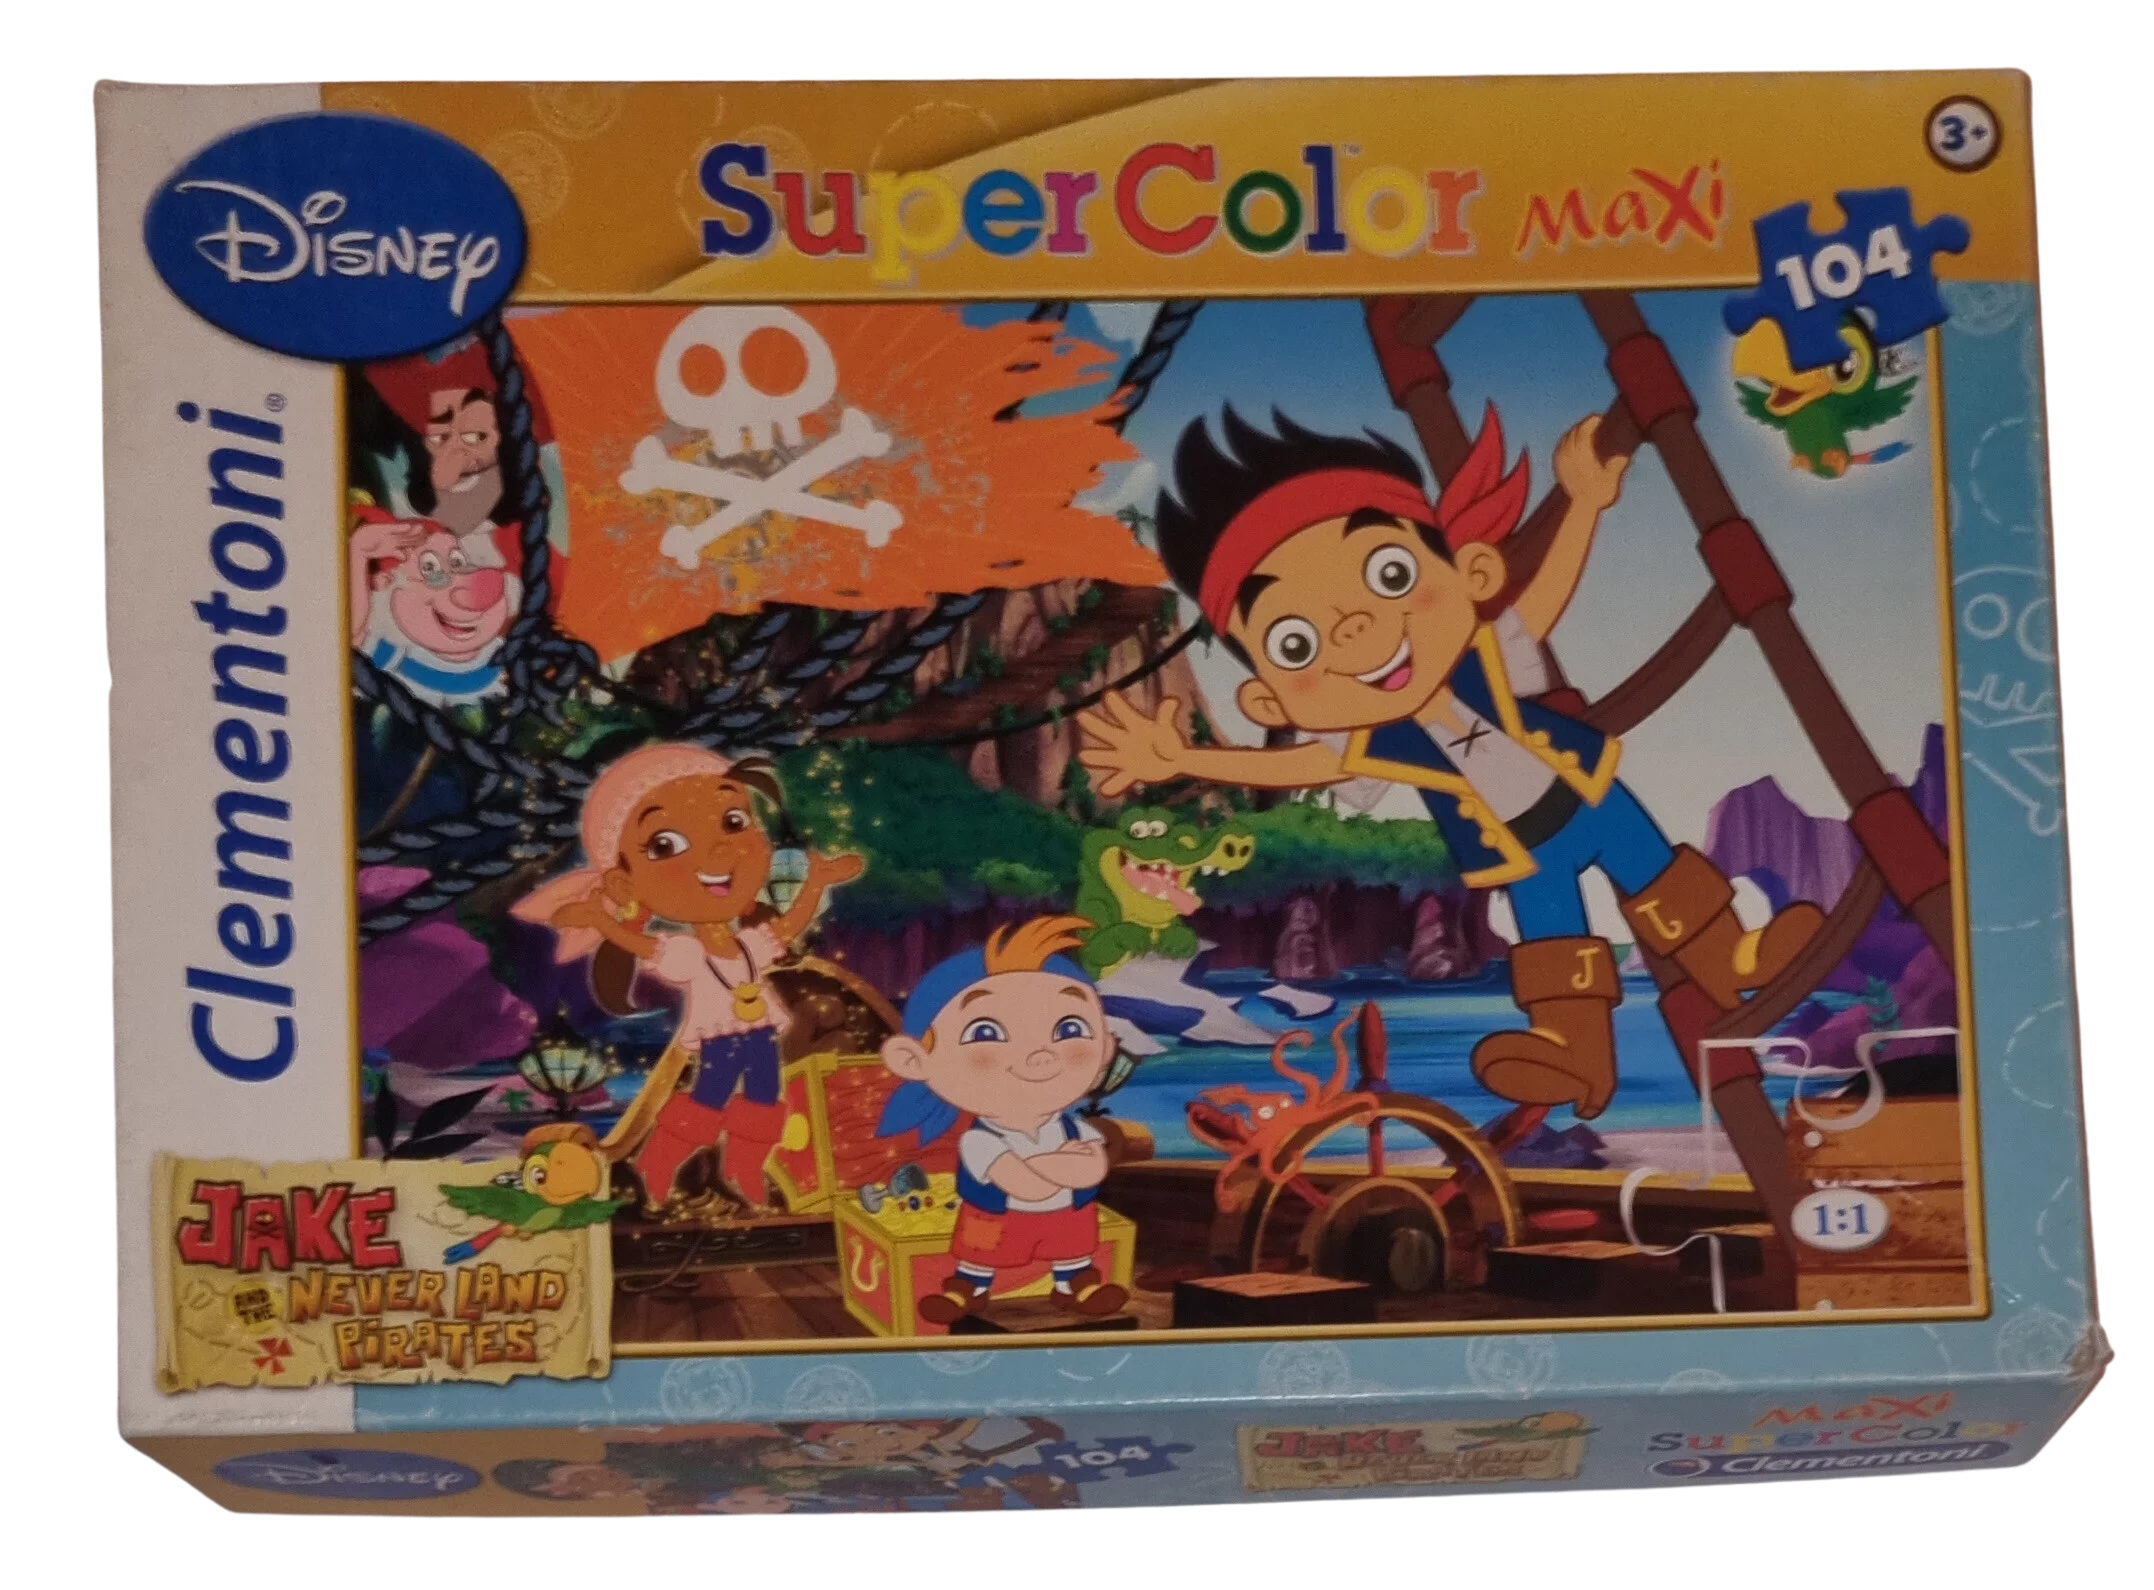 Clementoni Super Color Maxi Jake and the neverland pirates Puzzle 104 Teile